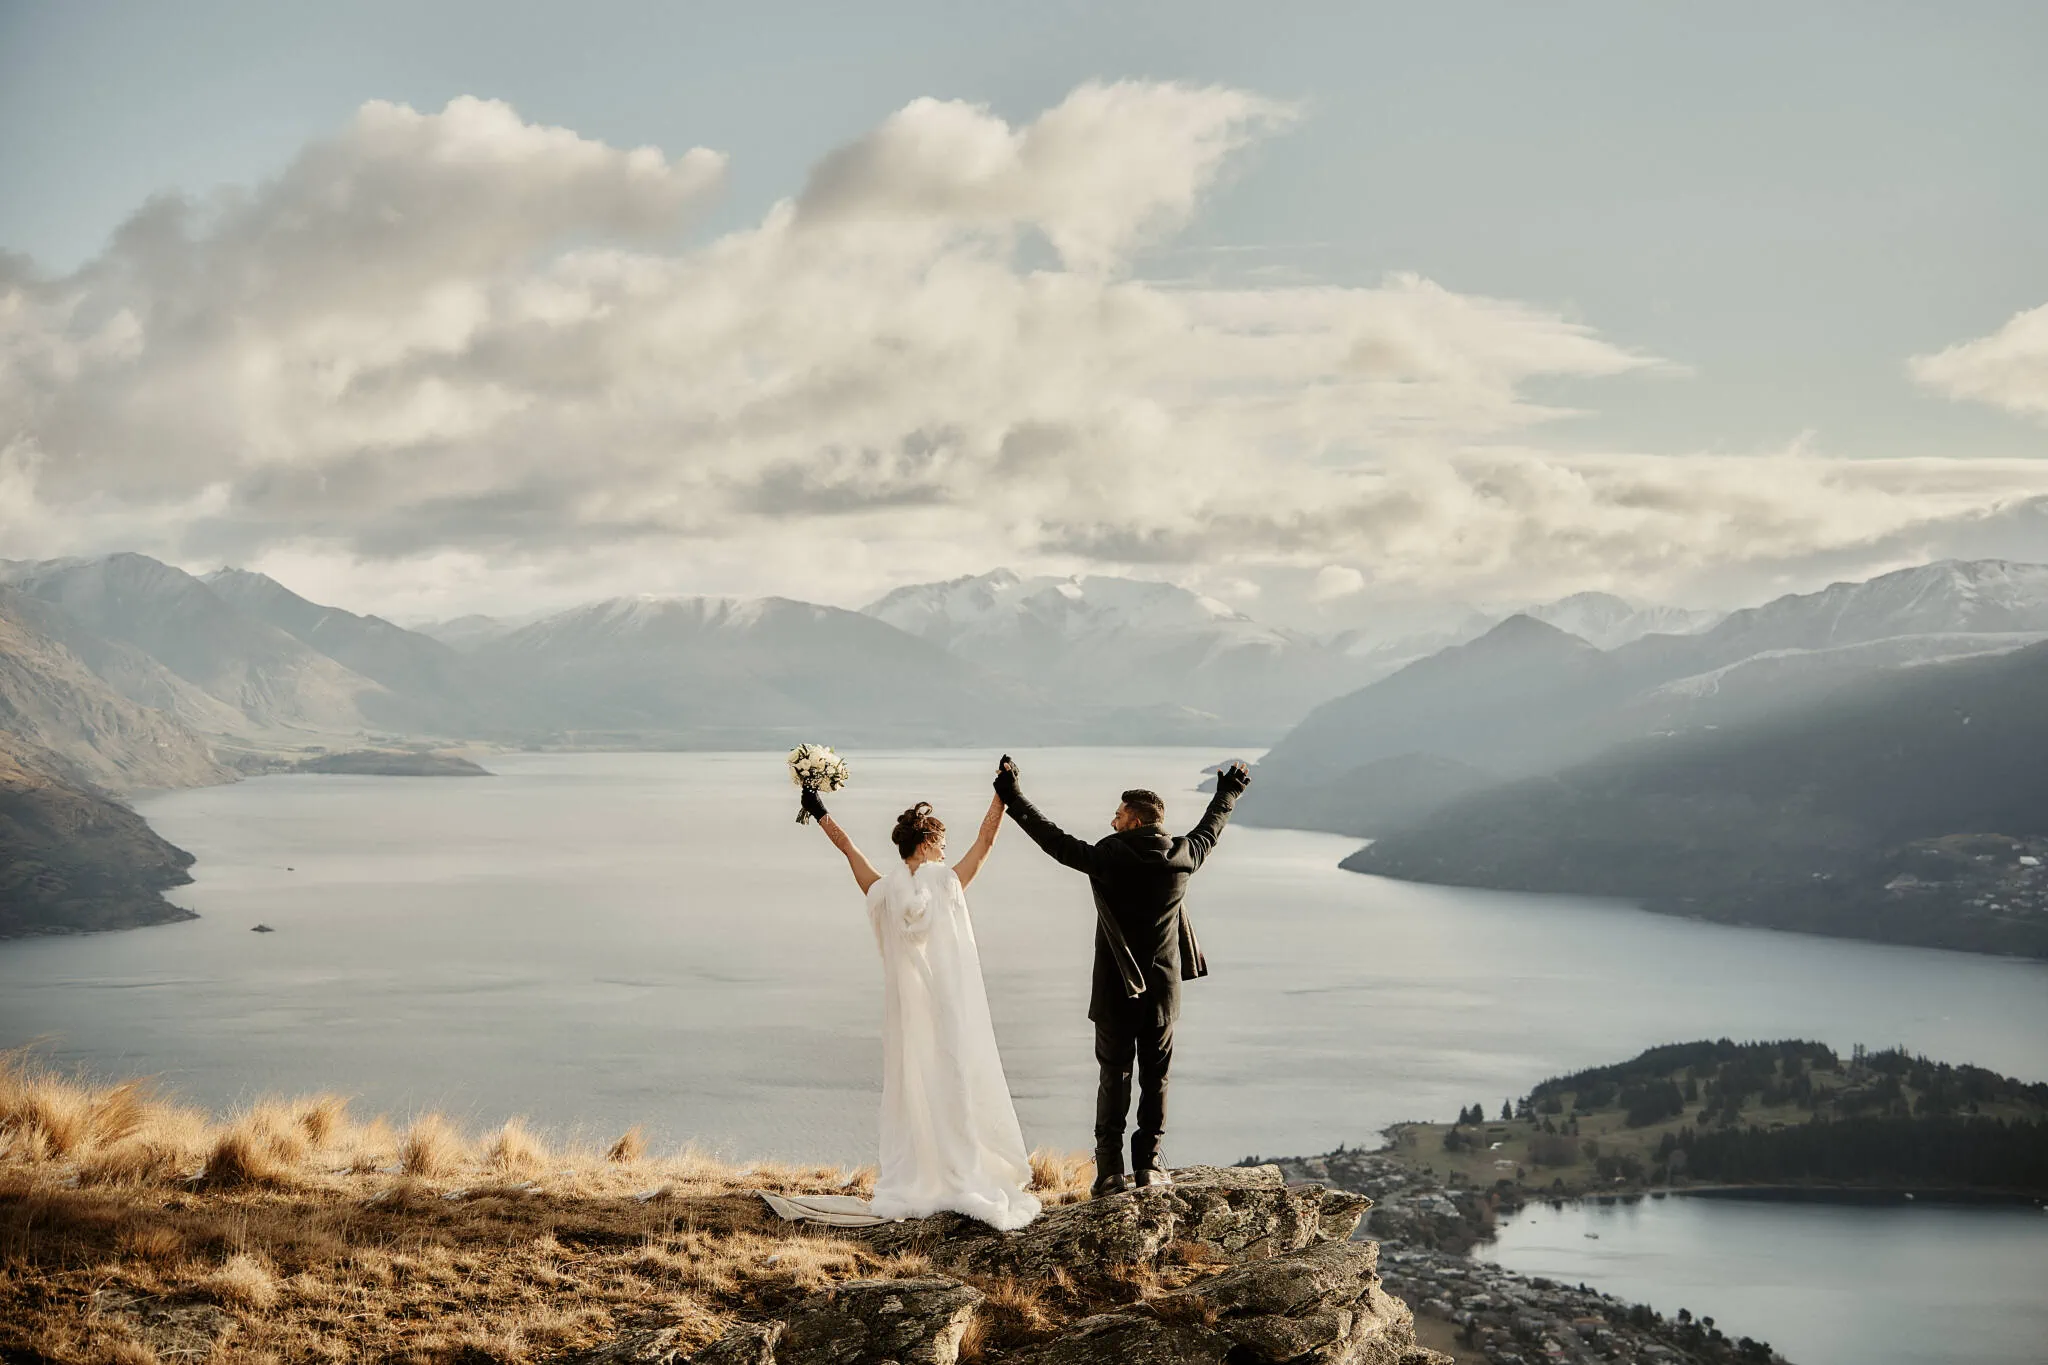 Queenstown New Zealand Elopement Wedding Photographer - Wasim and Yumn, a bride and groom, stand on top of a mountain overlooking Lake Wanaka for their Queenstown Islamic wedding.